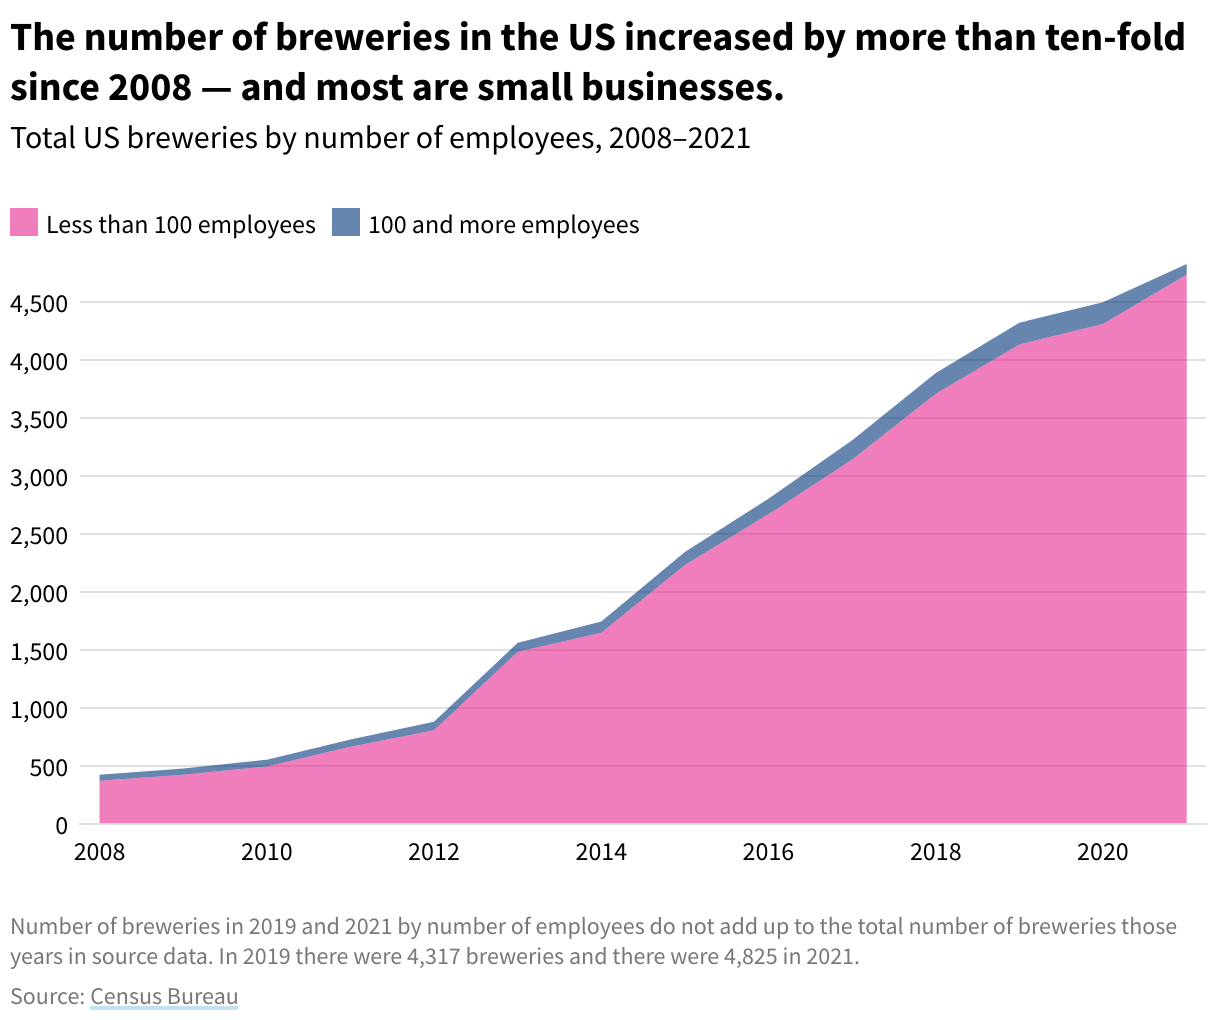 Area chart showing the number of breweries in the US, separated by breweries with less and more than 100 employees. The number of breweries has grown over time, especially those with less than 100 employees.